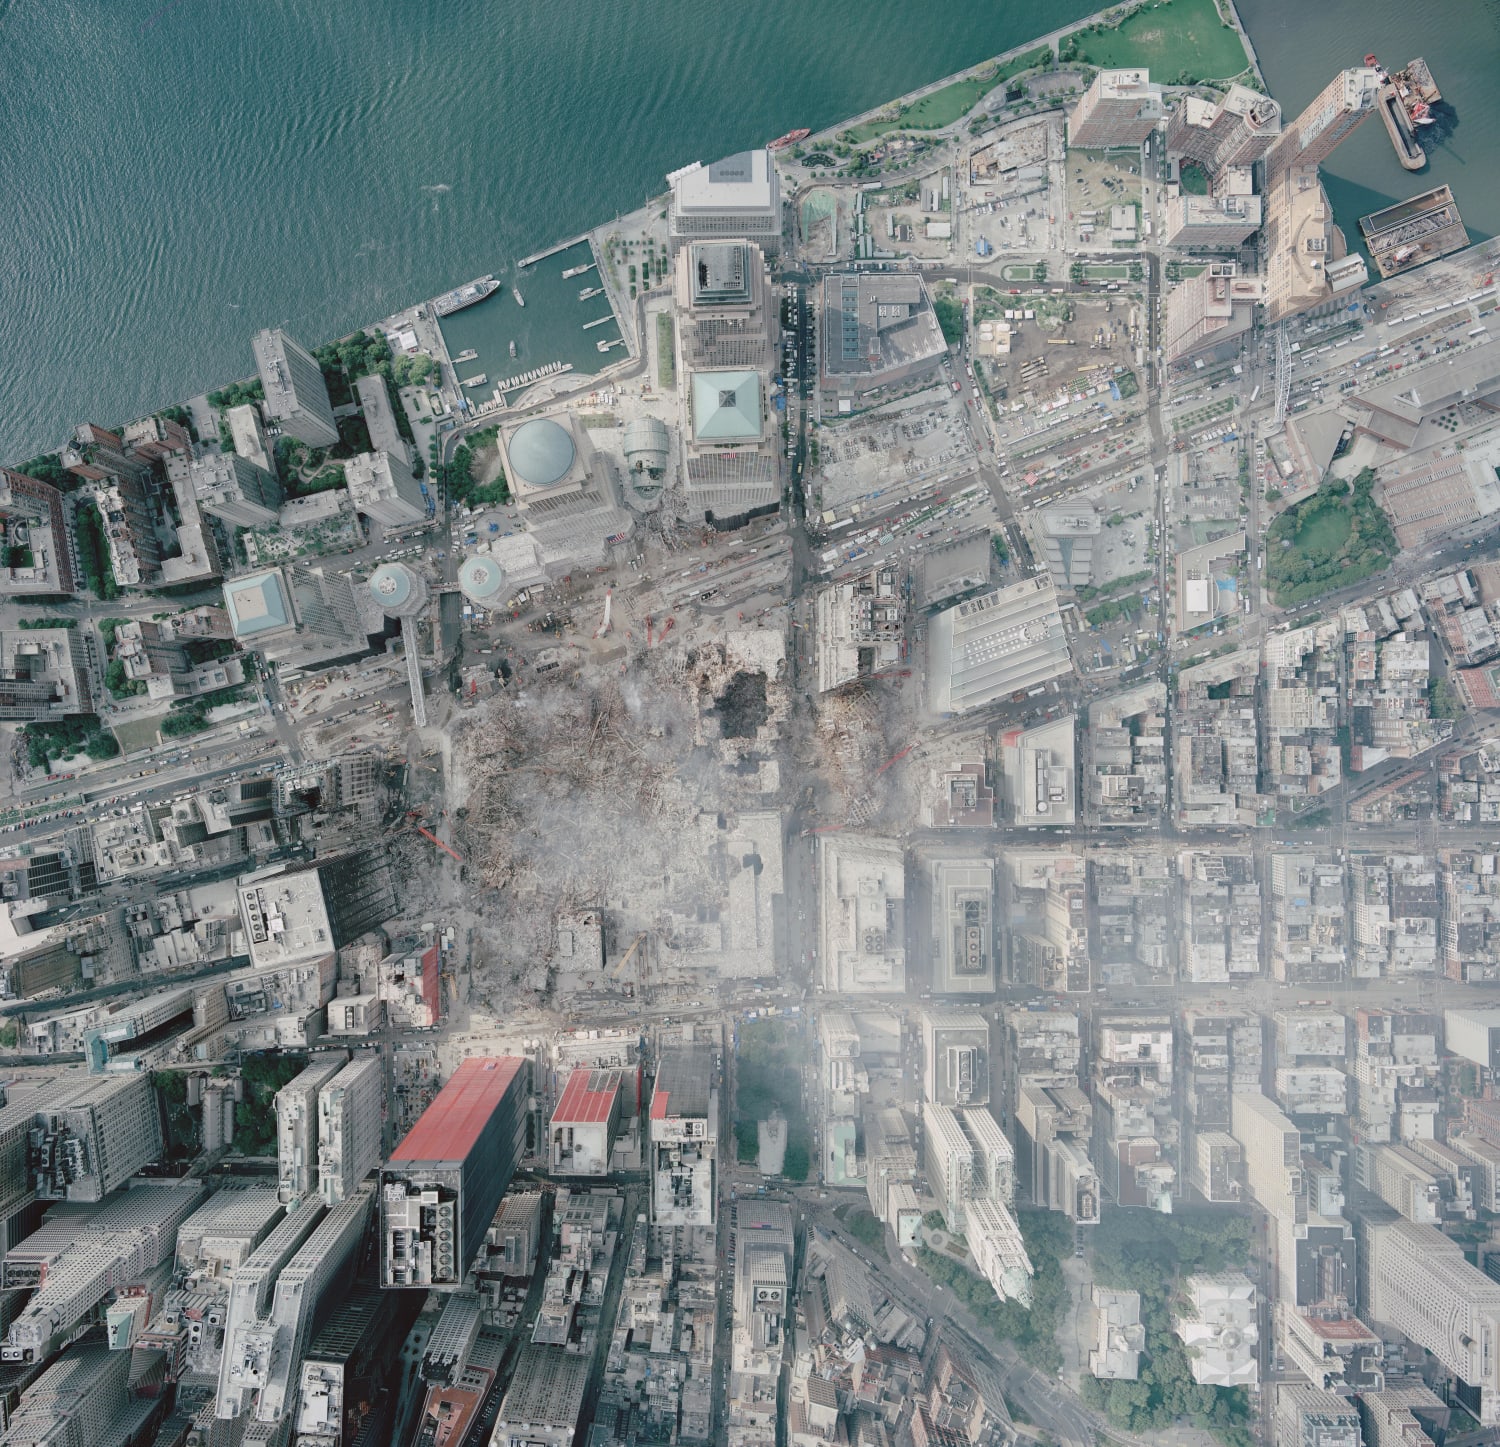 Remains of the World Trade Center complex in downtown New York City, United States, after the September 11 attacks. Image taken by NOAA's Cessna Citation Jet on September 23, 2001.